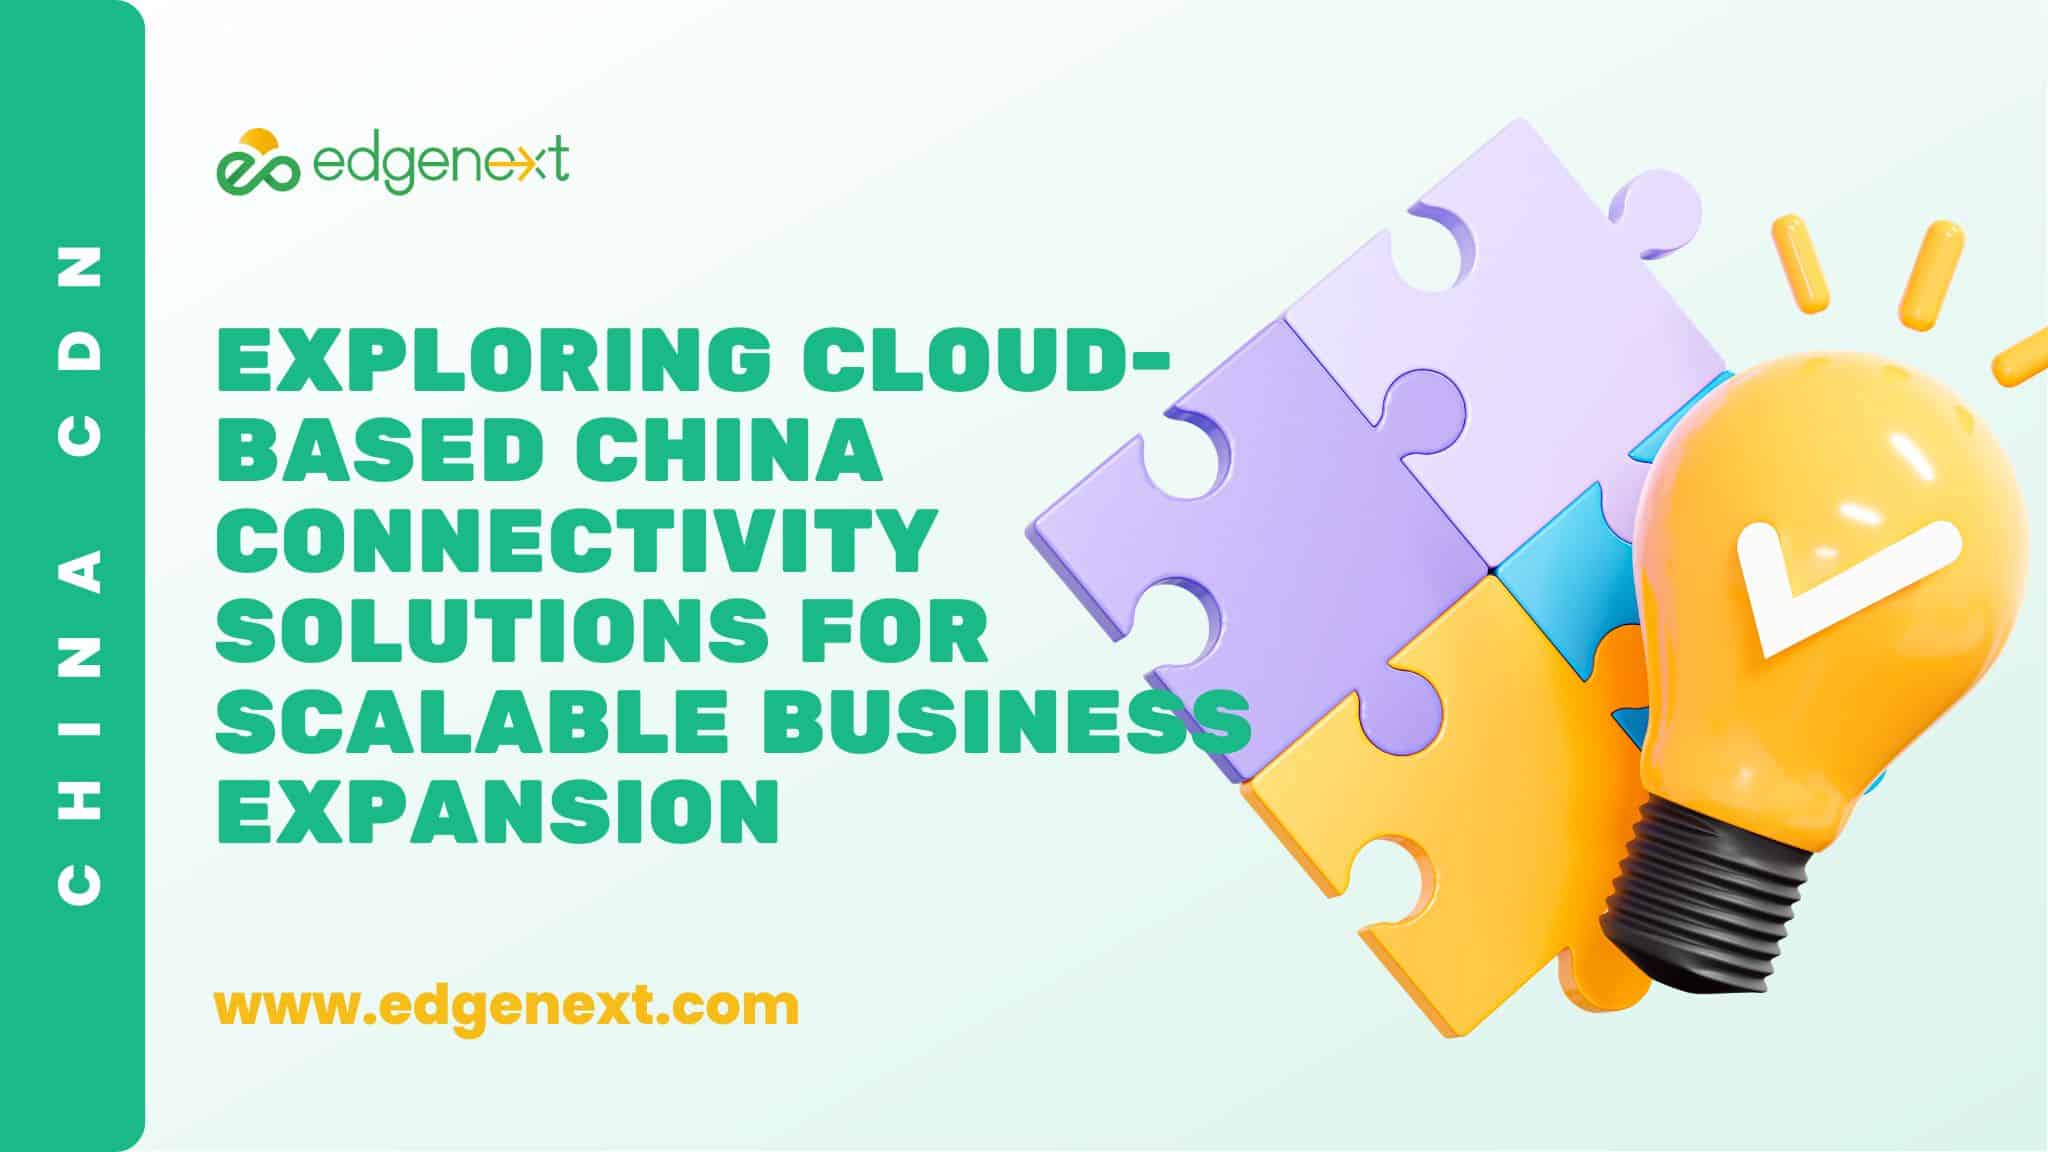 Exploring Cloud-Based China Connectivity Solutions for Scalable Business Expansion